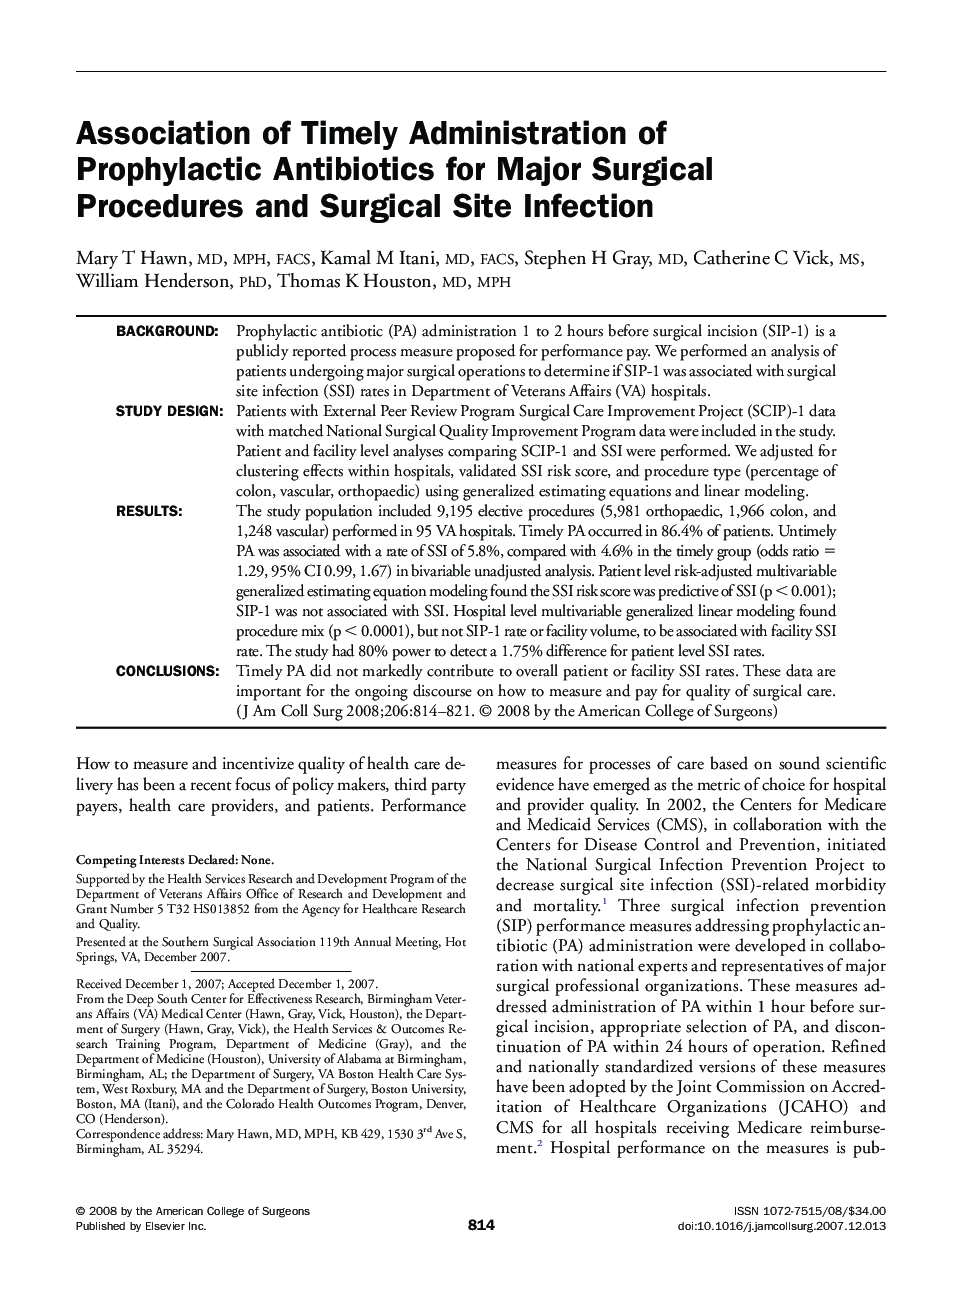 Association of Timely Administration of Prophylactic Antibiotics for Major Surgical Procedures and Surgical Site Infection 